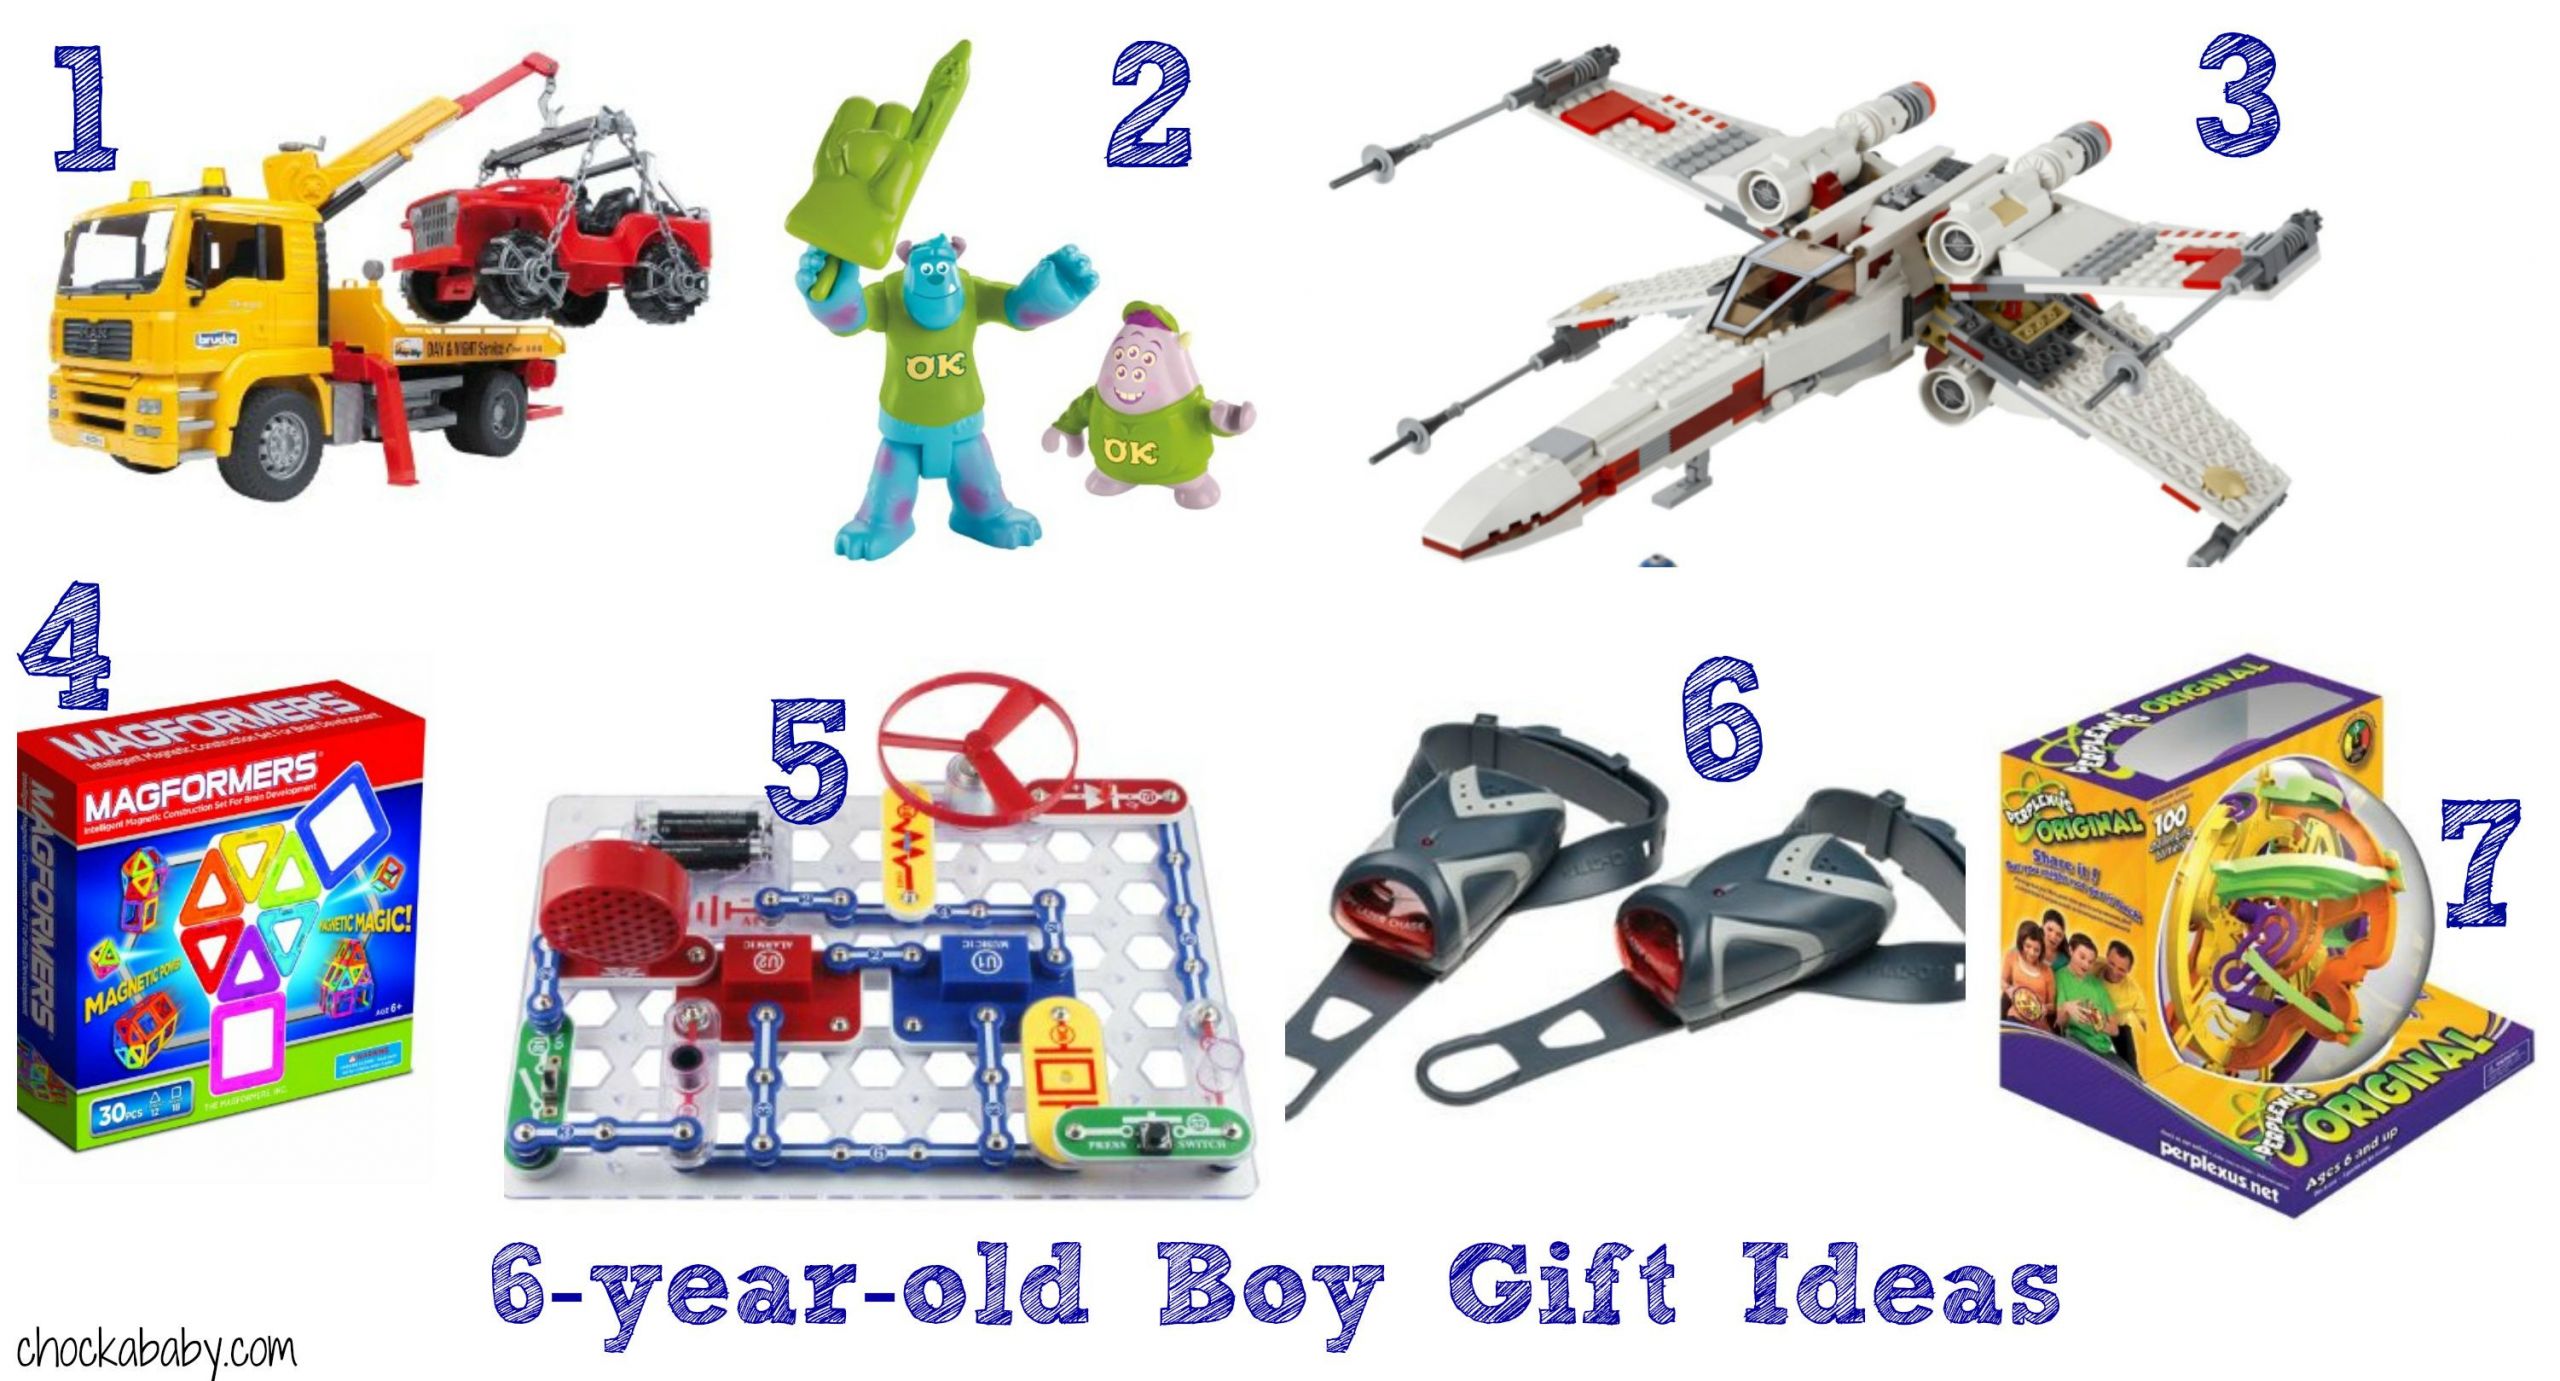 Christmas Gift Ideas 6 Year Old Boy
 Top 10 Posts of 2013